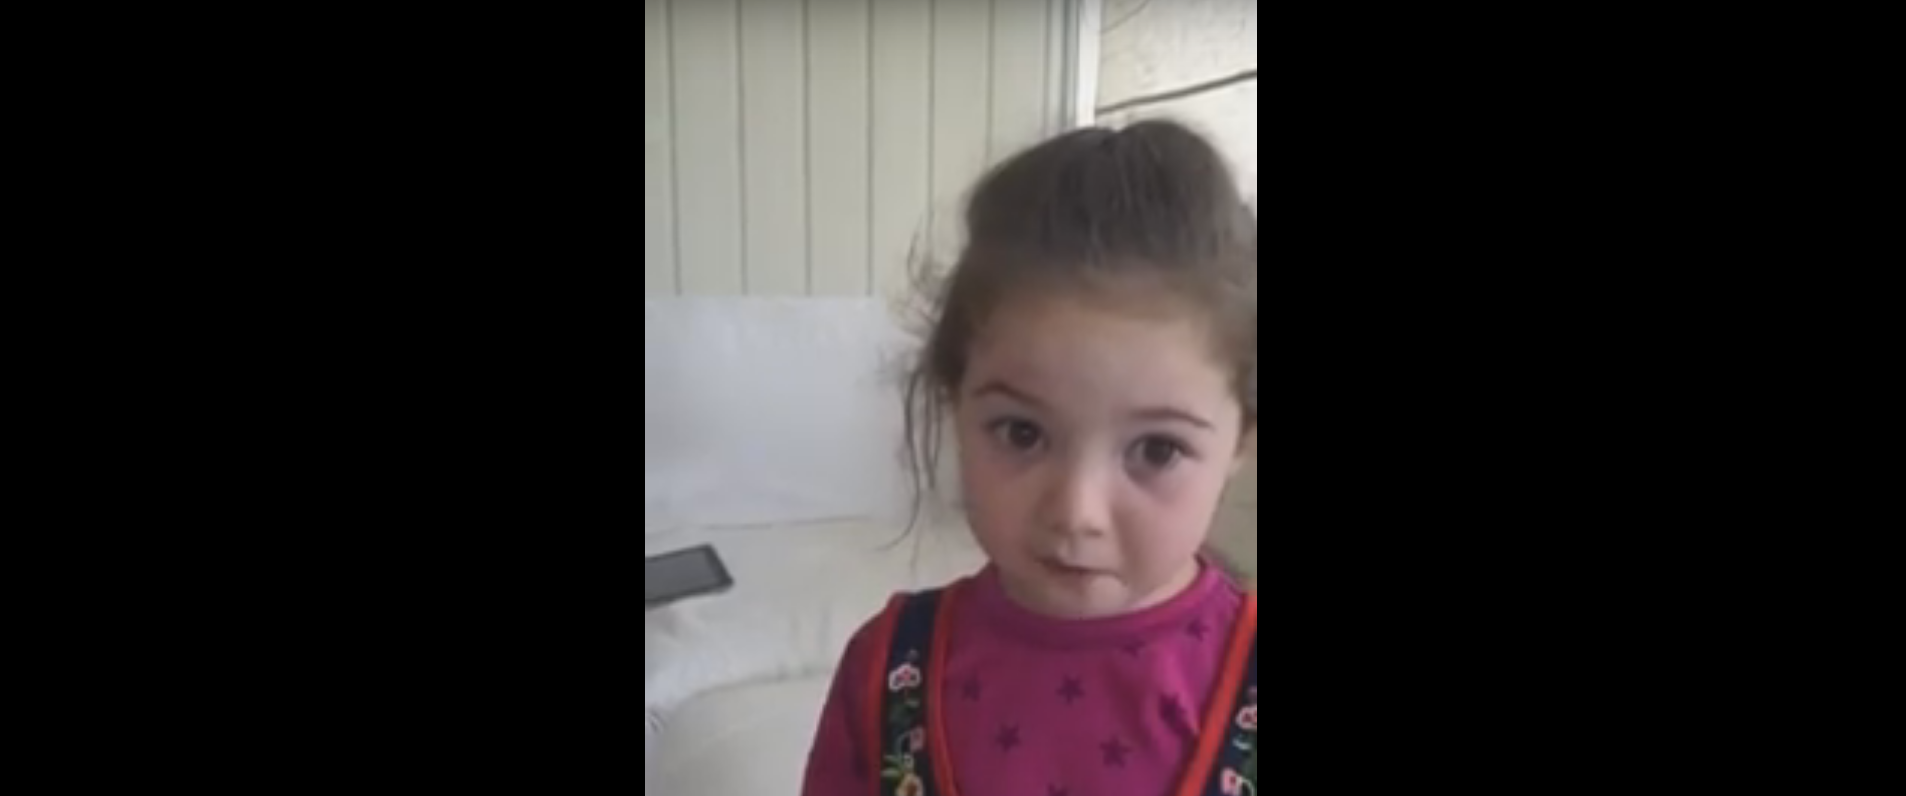 Adorable Child Explains Why She Won’t Eat Meat